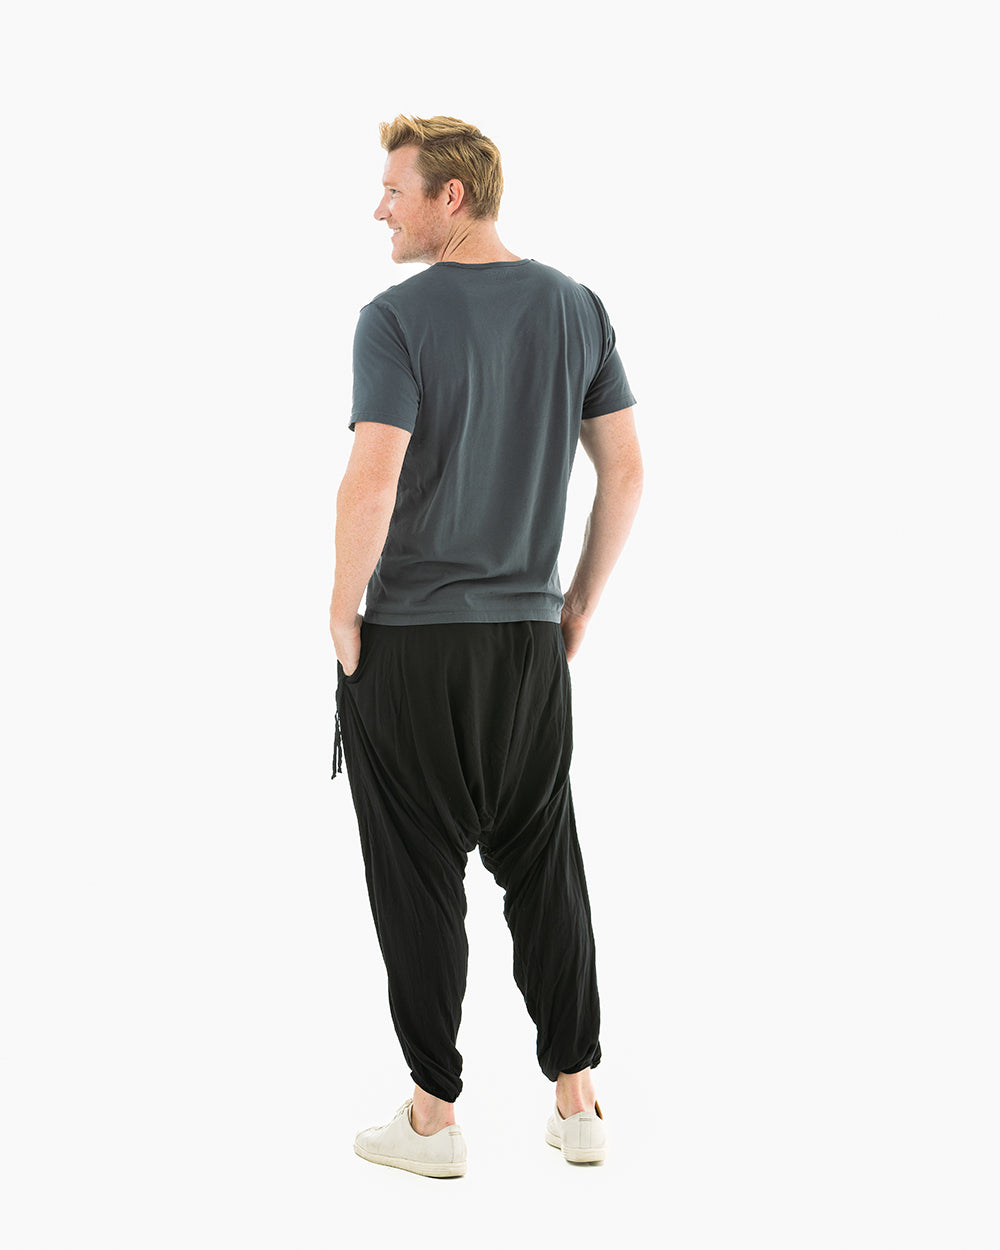 The Worlds Most Comfortable Pants